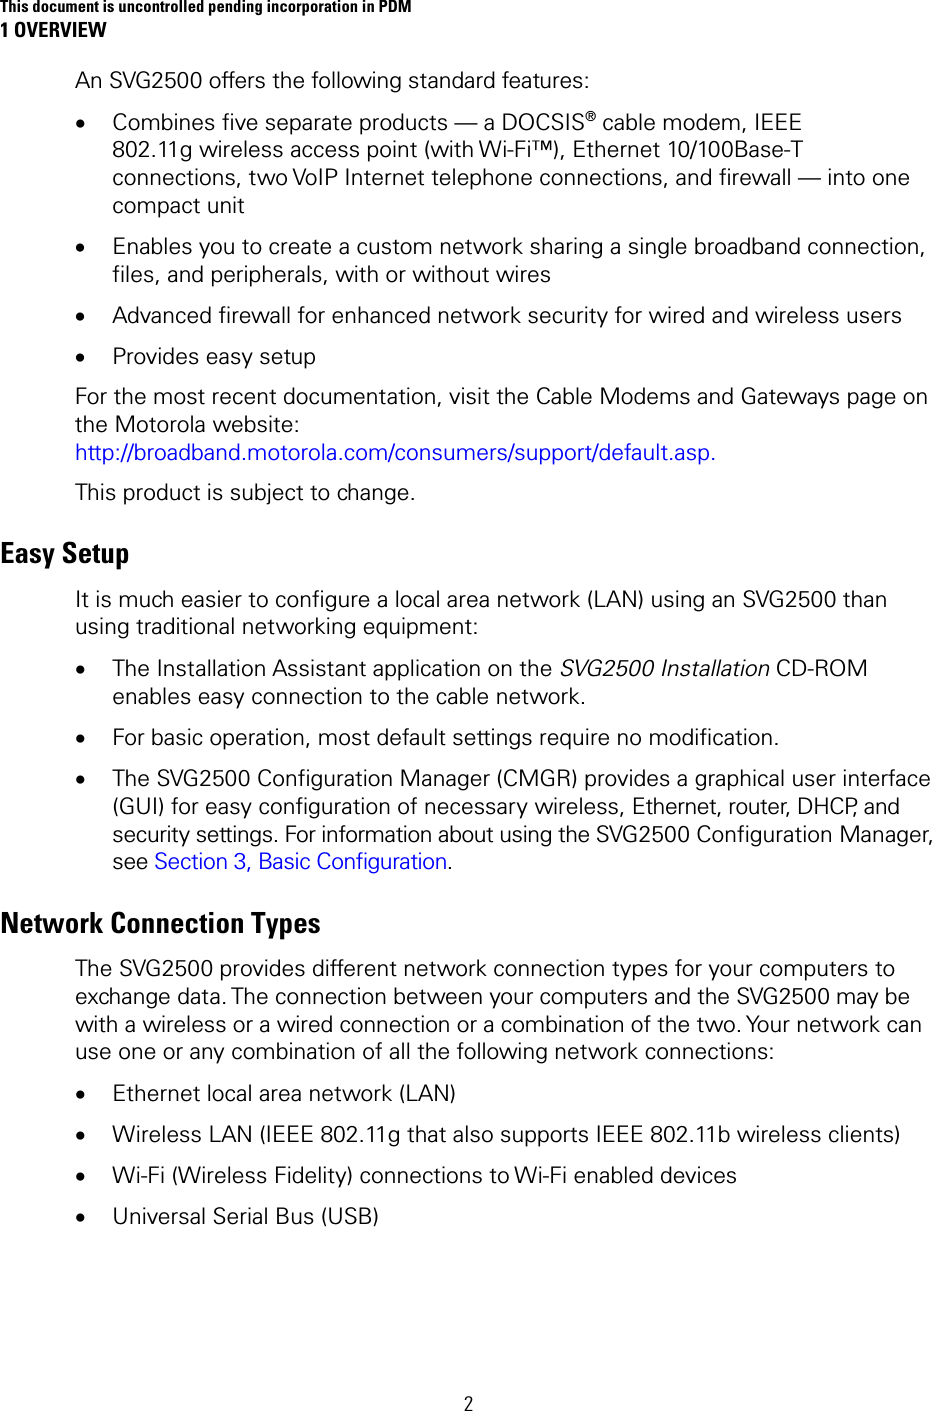 This document is uncontrolled pending incorporation in PDM 1 OVERVIEW 2 An SVG2500 offers the following standard features: • Combines five separate products — a DOCSIS® cable modem, IEEE 802.11g wireless access point (with Wi-Fi™), Ethernet 10/100Base-T connections, two VoIP Internet telephone connections, and firewall — into one compact unit • Enables you to create a custom network sharing a single broadband connection, files, and peripherals, with or without wires • Advanced firewall for enhanced network security for wired and wireless users • Provides easy setup For the most recent documentation, visit the Cable Modems and Gateways page on the Motorola website: http://broadband.motorola.com/consumers/support/default.asp. This product is subject to change. Easy Setup It is much easier to configure a local area network (LAN) using an SVG2500 than using traditional networking equipment: • The Installation Assistant application on the SVG2500 Installation CD-ROM enables easy connection to the cable network. • For basic operation, most default settings require no modification. • The SVG2500 Configuration Manager (CMGR) provides a graphical user interface (GUI) for easy configuration of necessary wireless, Ethernet, router, DHCP, and security settings. For information about using the SVG2500 Configuration Manager, see Section 3, Basic Configuration. Network Connection Types The SVG2500 provides different network connection types for your computers to exchange data. The connection between your computers and the SVG2500 may be with a wireless or a wired connection or a combination of the two. Your network can use one or any combination of all the following network connections: • Ethernet local area network (LAN) • Wireless LAN (IEEE 802.11g that also supports IEEE 802.11b wireless clients) • Wi-Fi (Wireless Fidelity) connections to Wi-Fi enabled devices  • Universal Serial Bus (USB) 